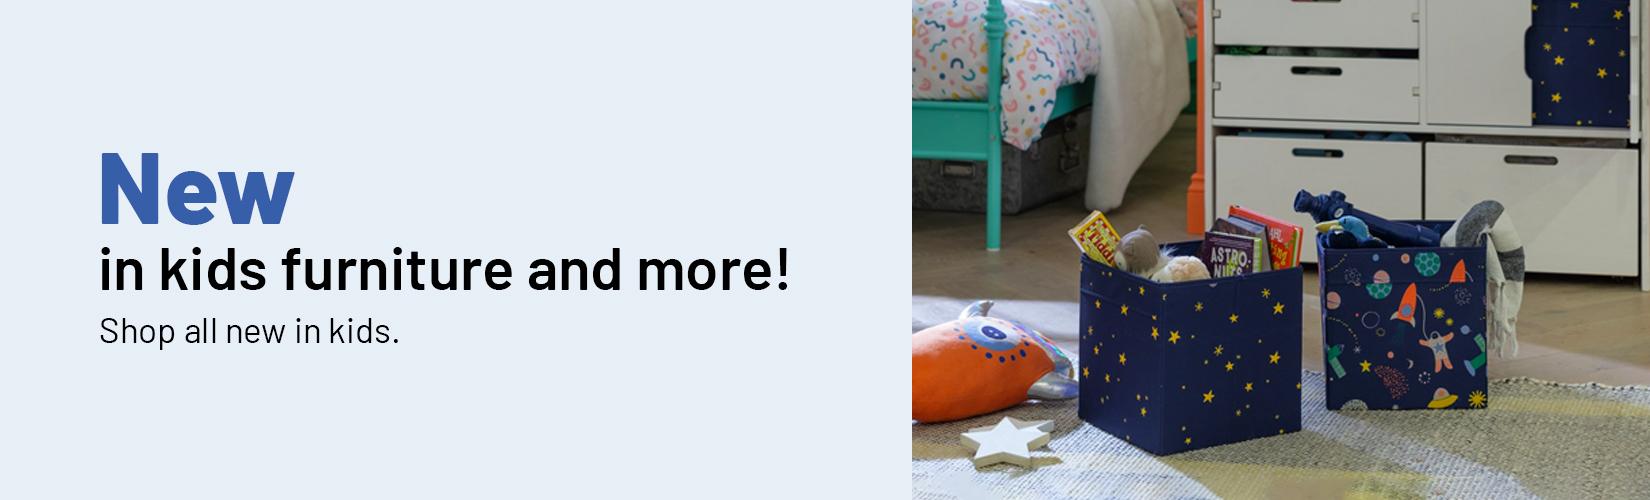 New in kids furniture and more! Shop all new in kids.